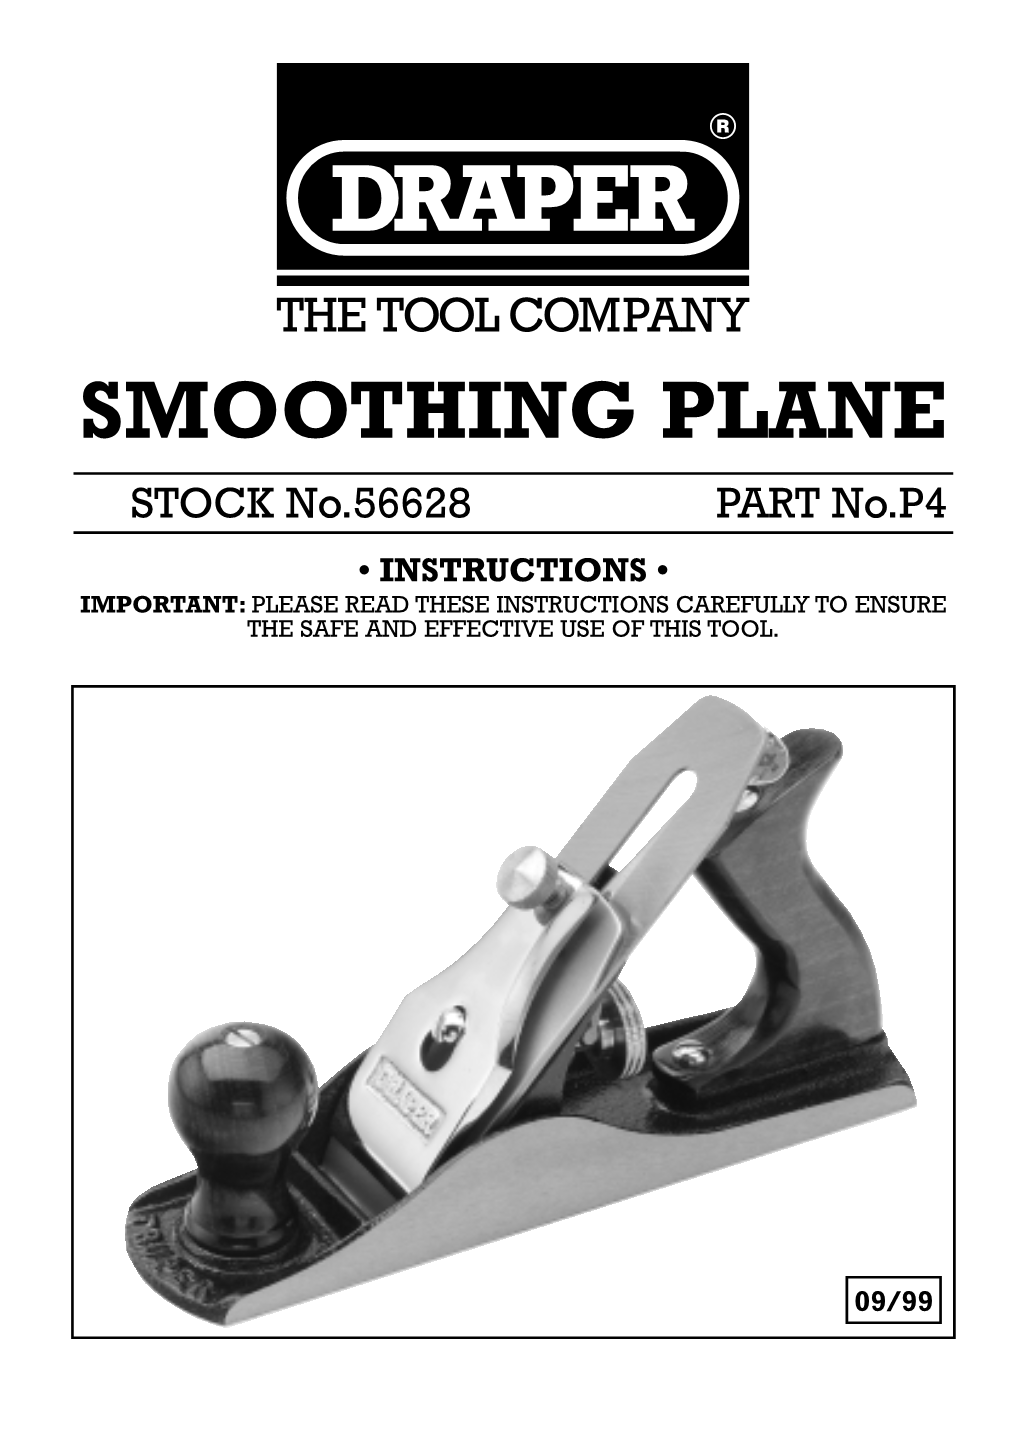 SMOOTHING PLANE � STOCK No.56628 � PART No.P4 • INSTRUCTIONS • IMPORTANT: PLEASE READ THESE INSTRUCTIONS CAREFULLY to ENSURE the SAFE and EFFECTIVE USE of THIS TOOL